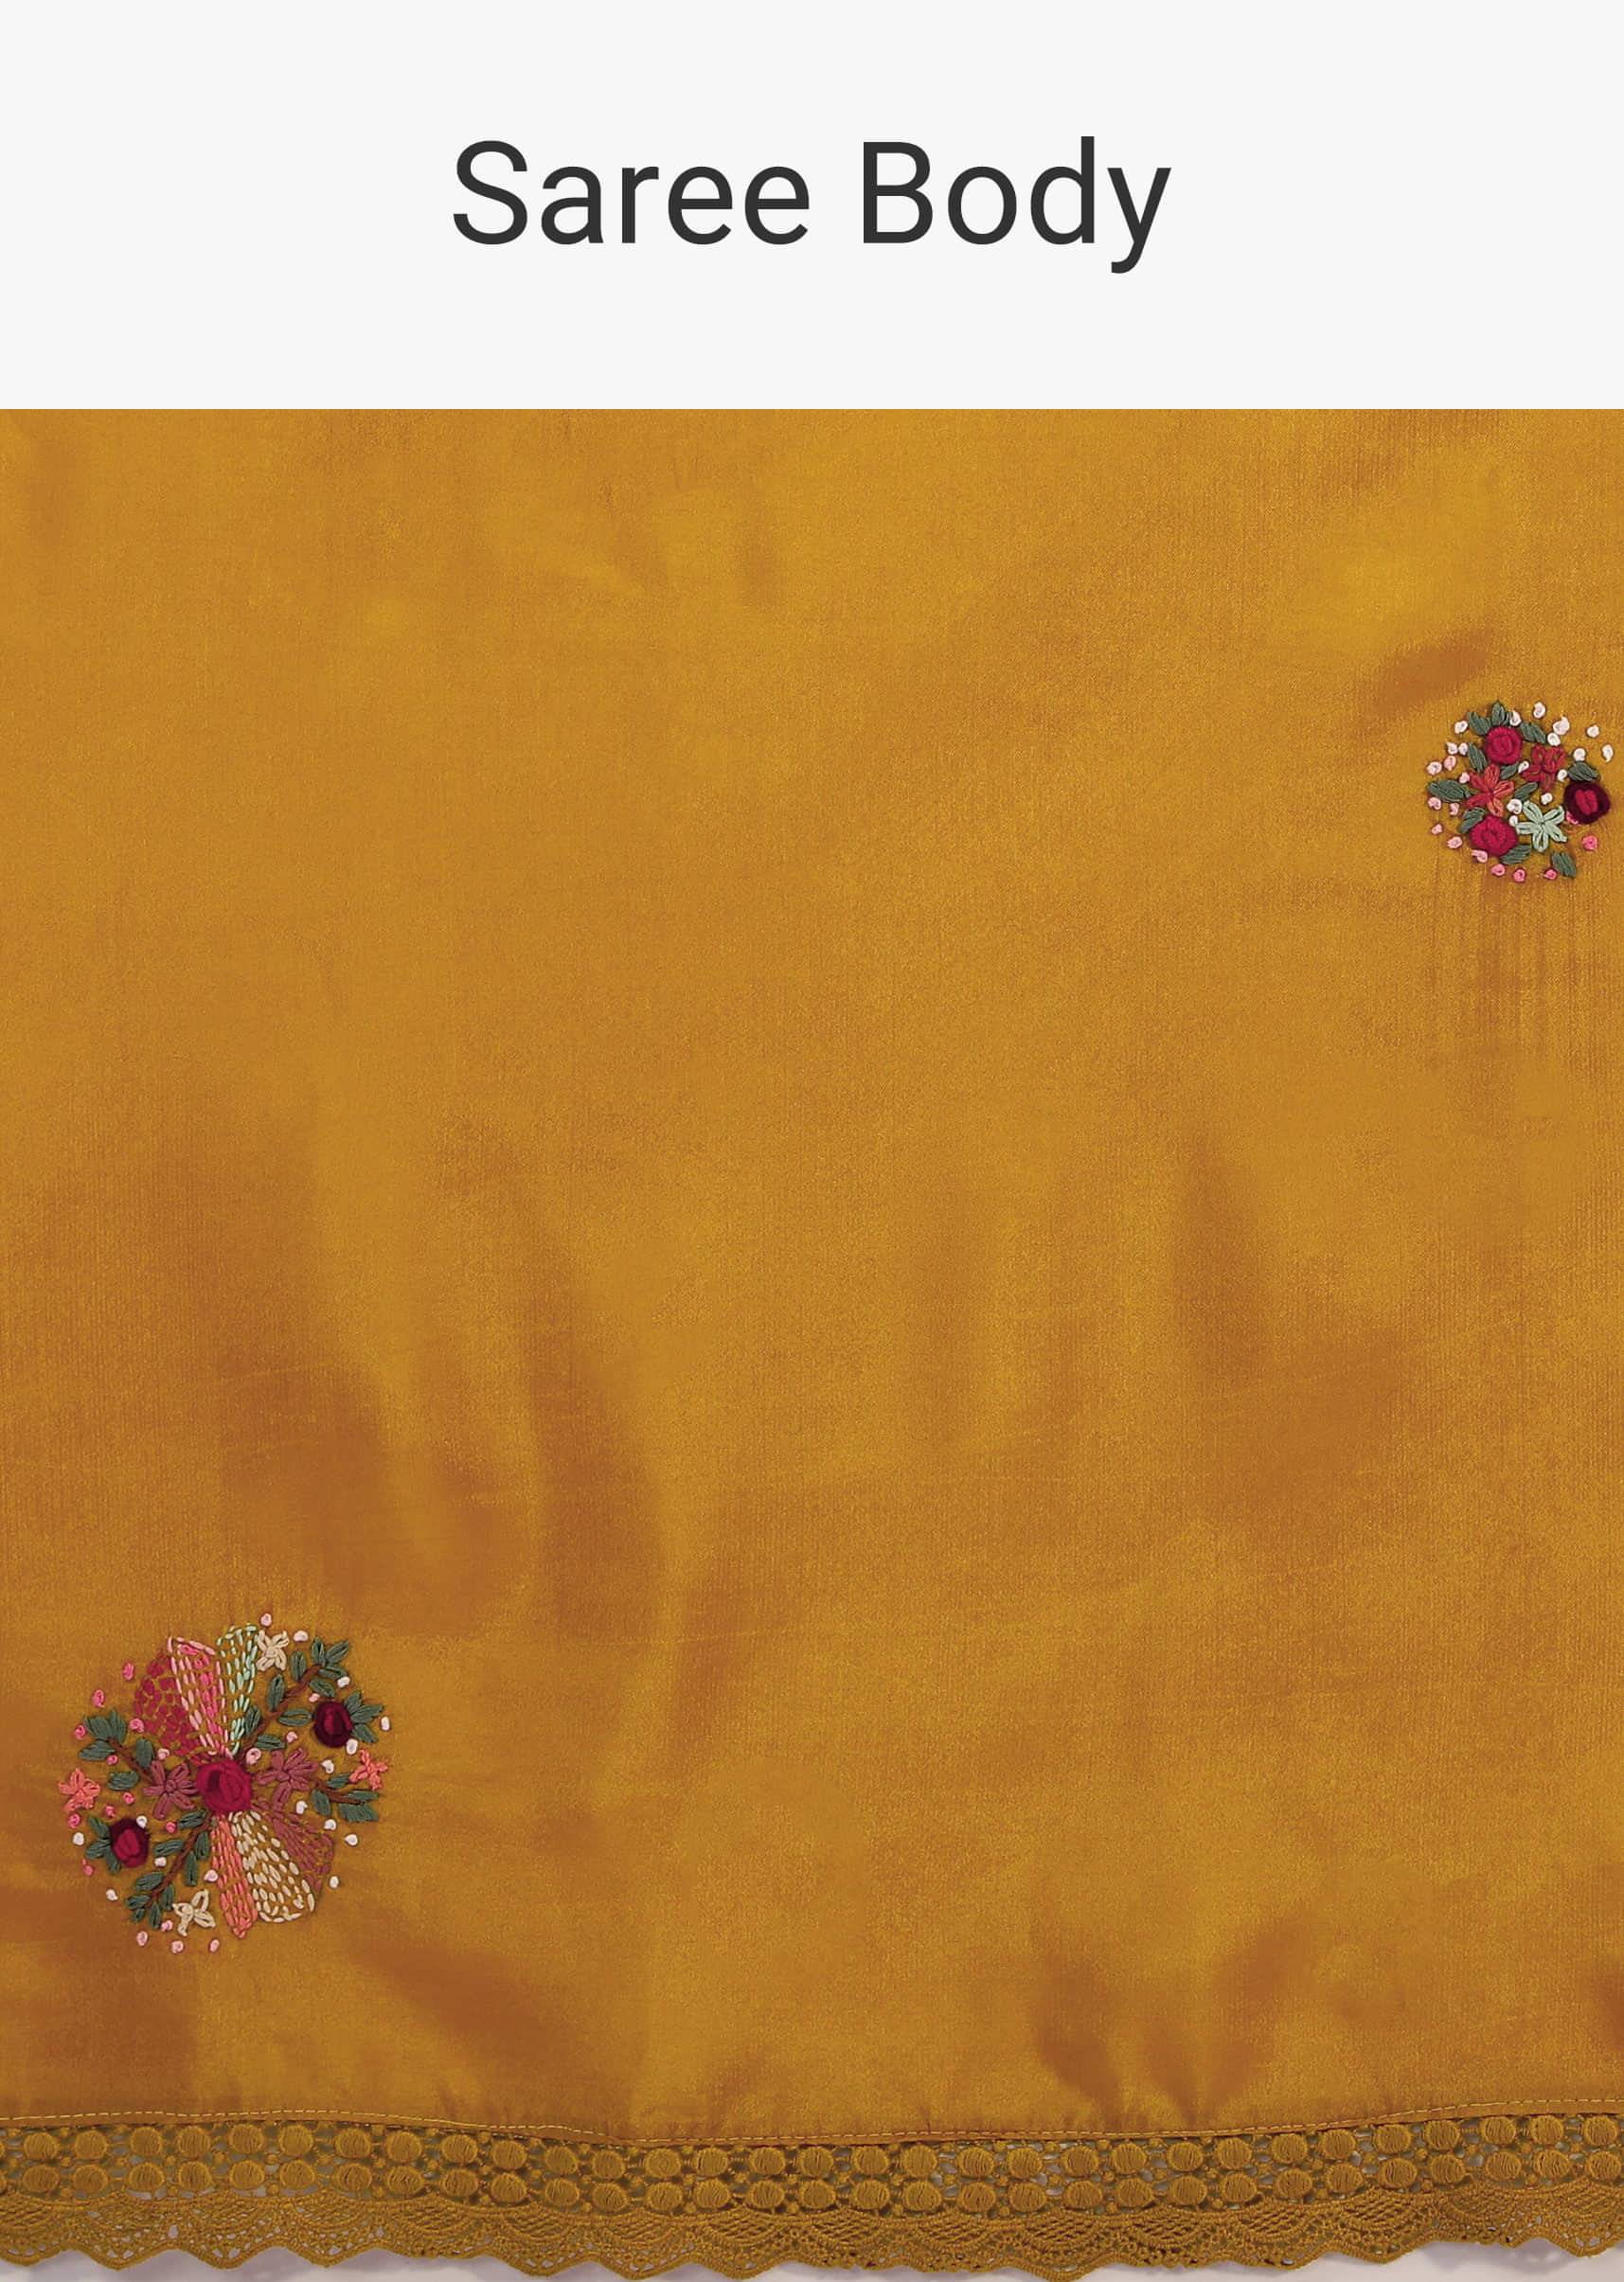 Mustard Saree In Silk With Multicolored Bud Hand Embroidery In Floral Motifs And Running Stich Design  